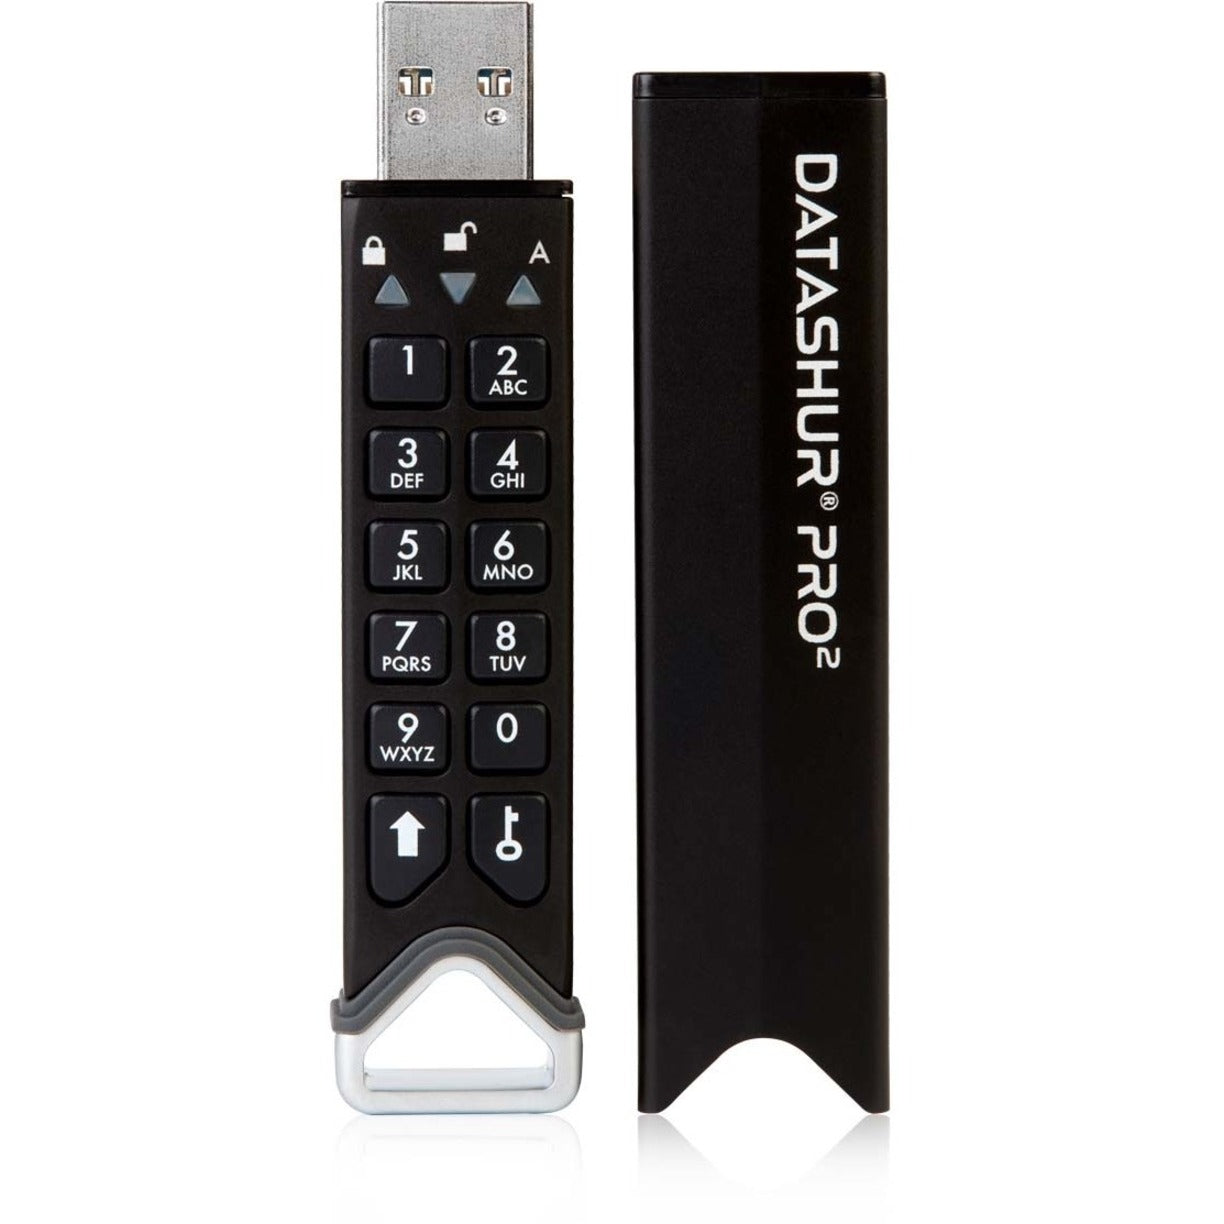 iStorage IS-FL-DP2-256-32 datAshur PRO² 32GB USB 3.2 (Gen 1) Type A Flash Drive, Secure, FIPS 140-2 Level 3 Certified, Password Protected, Dust/Water-Resistant